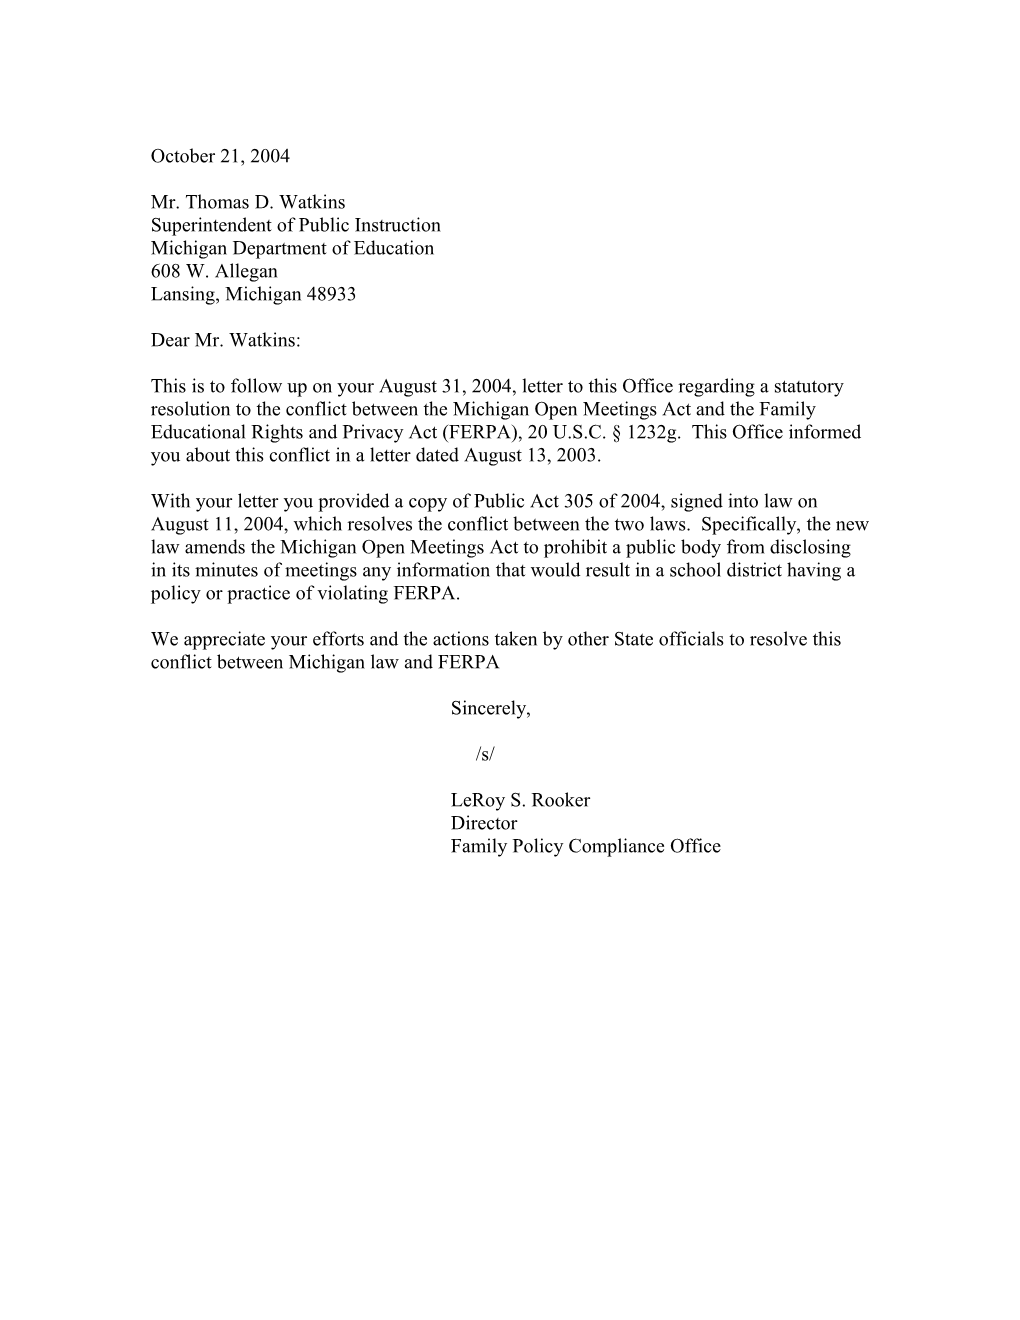 Letters to Michigan Department of Education Re: Open Meetings Act (MS Word)